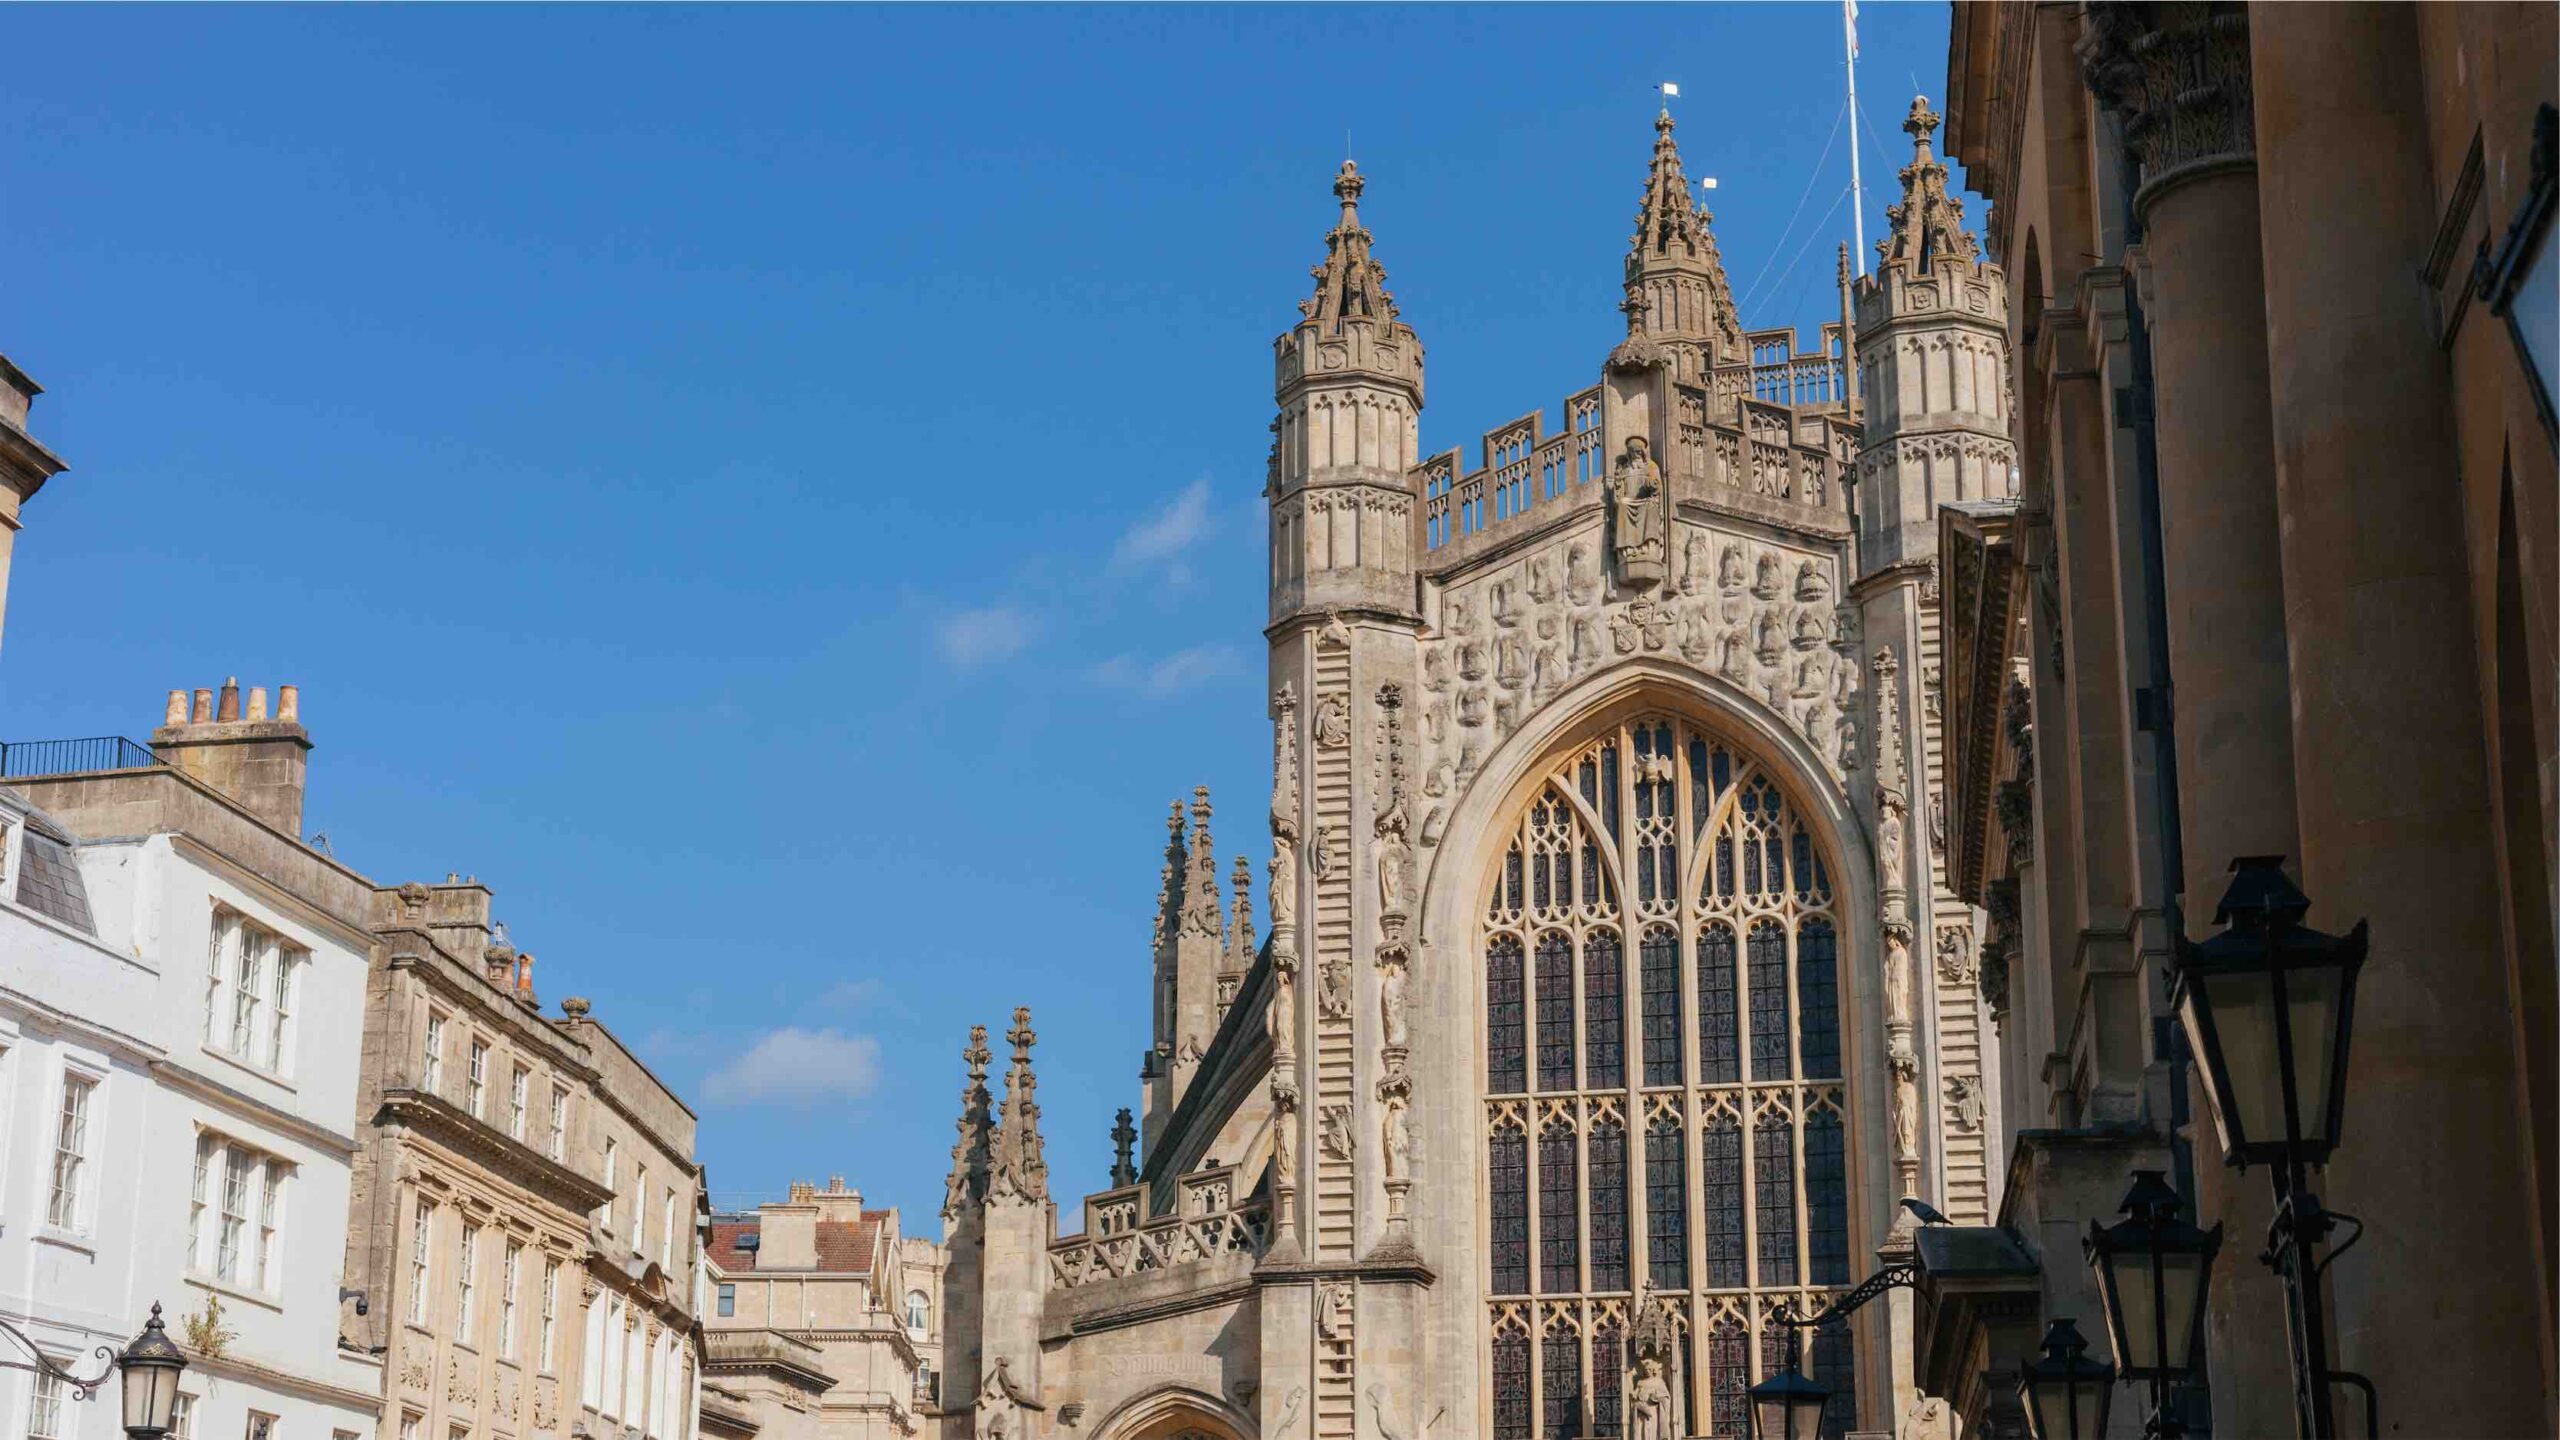 The upper part of Bath Abbey with surrounding buildings and blue sky